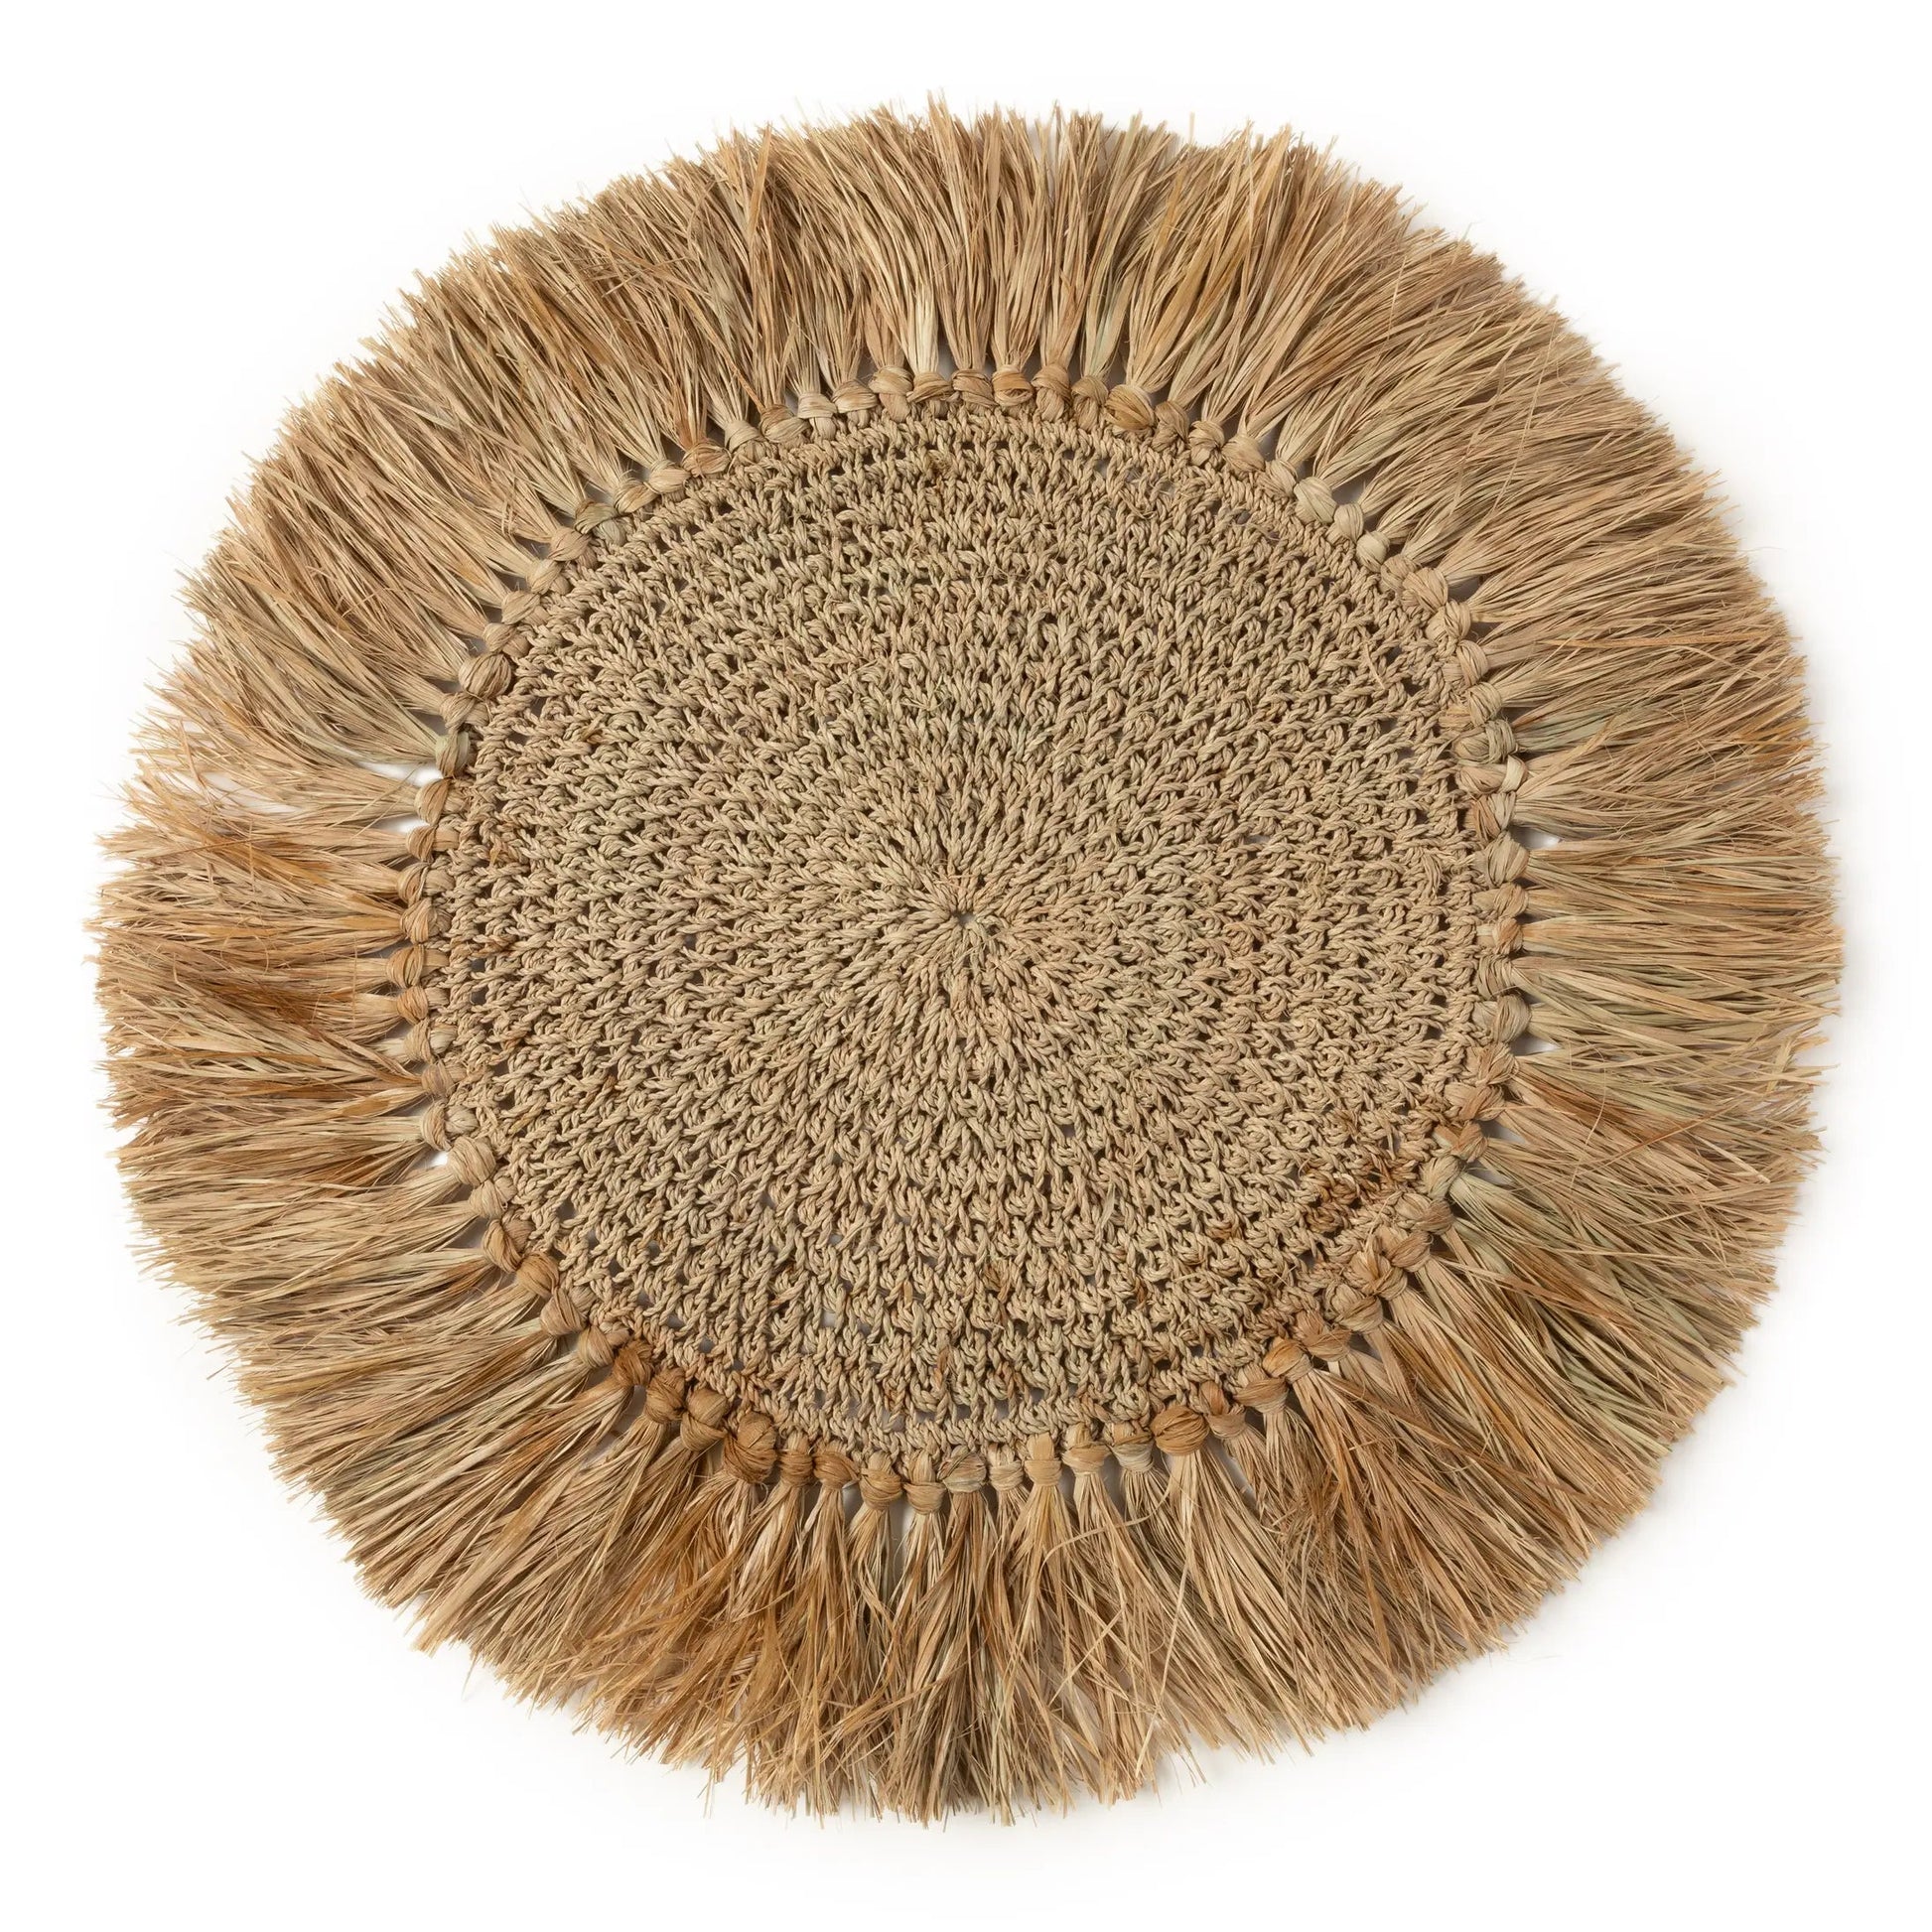 ‘The Crochet Raffia’ Placemat (Natural) - EcoLuxe Furnishings